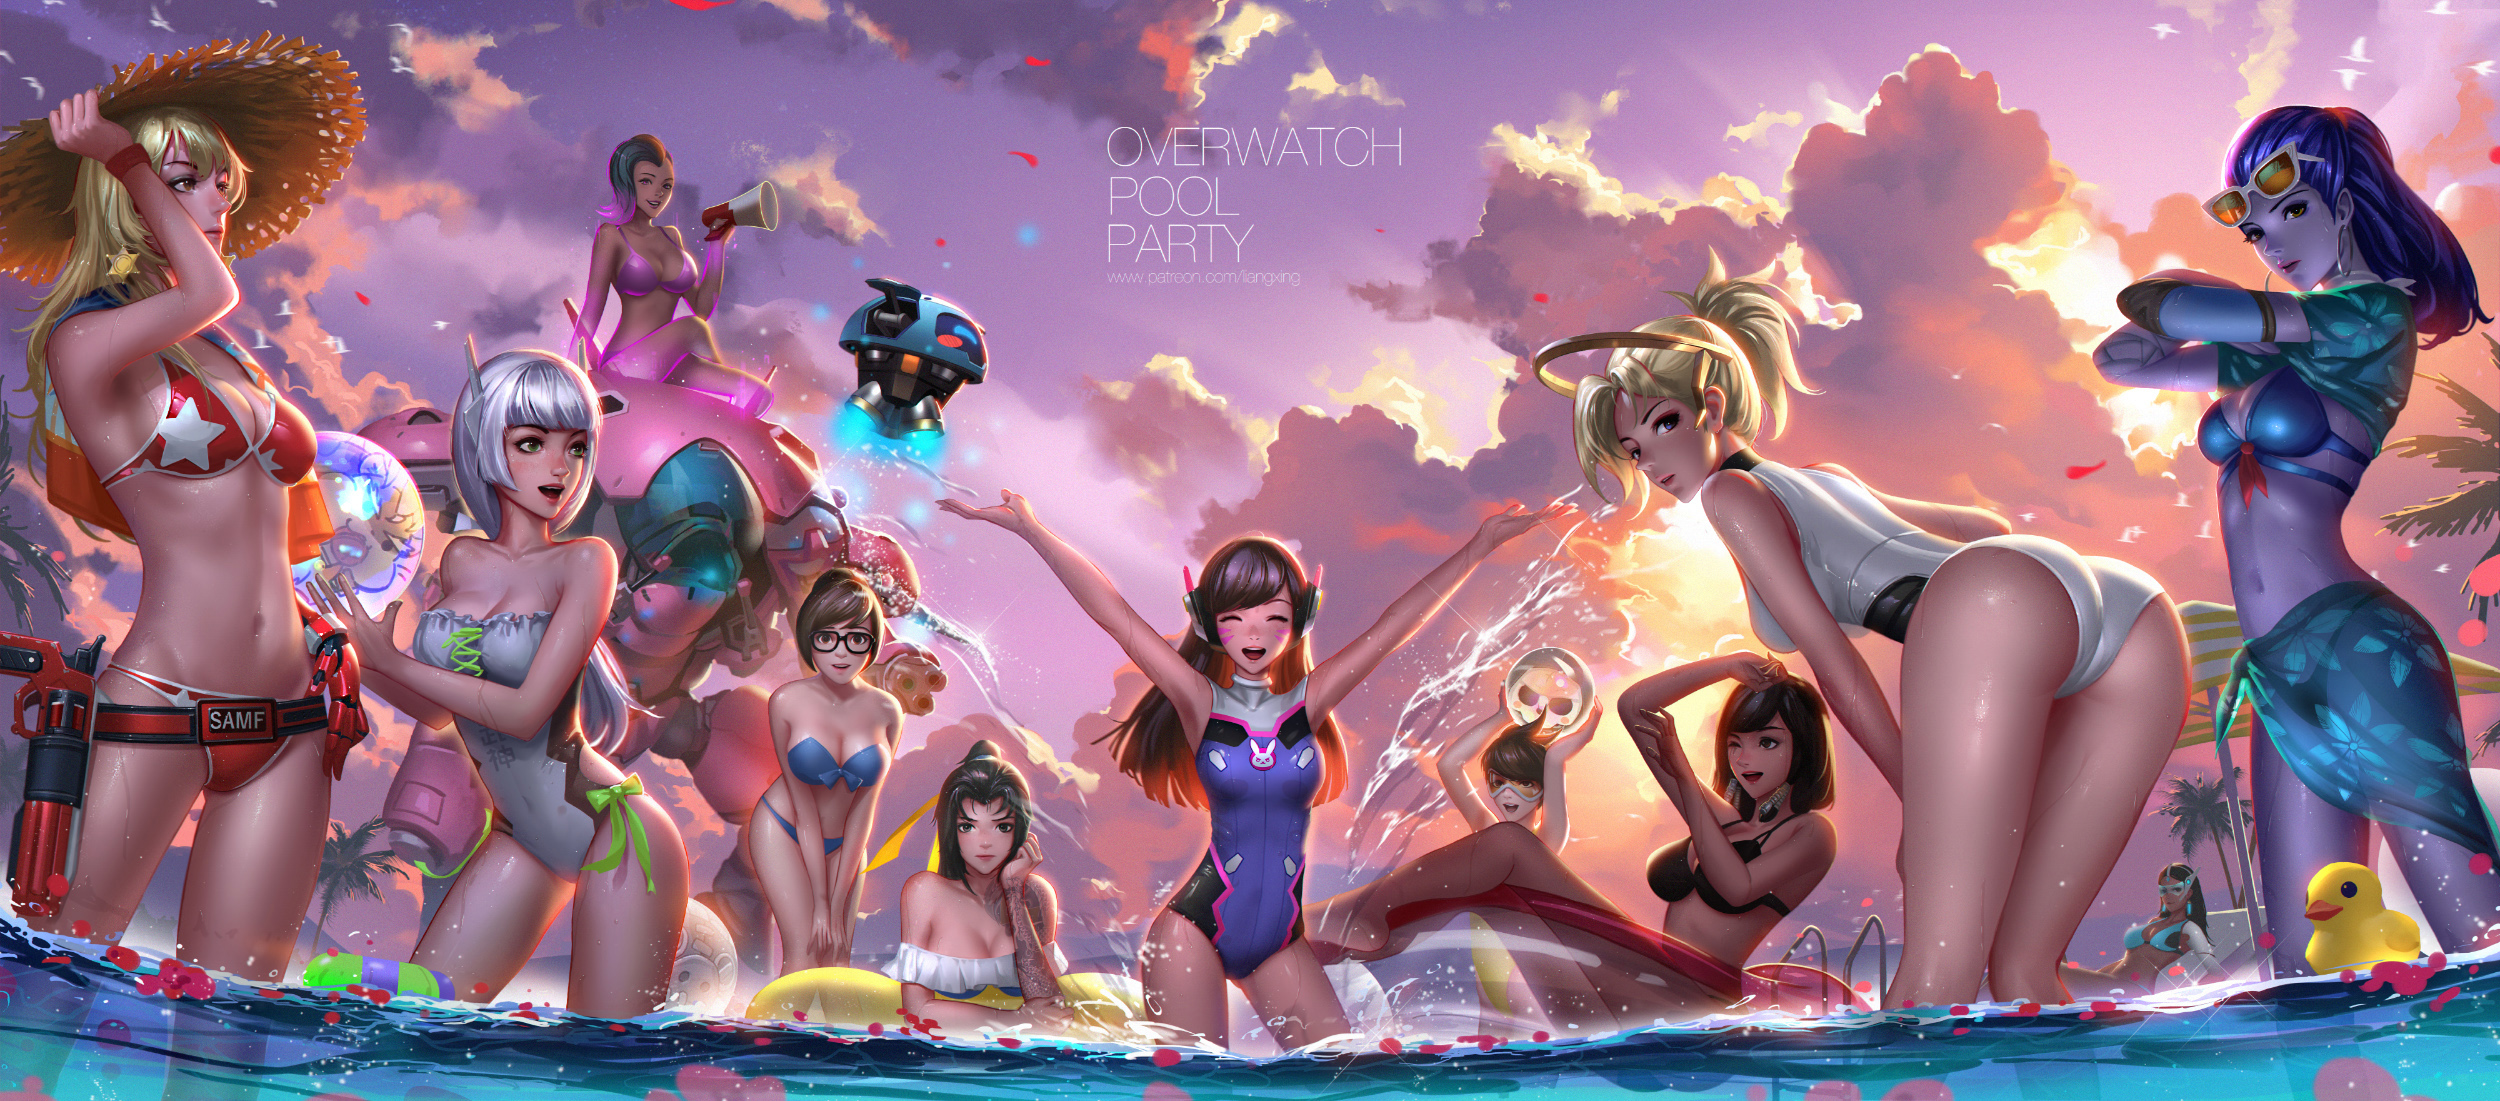 Overwatch Pool Party